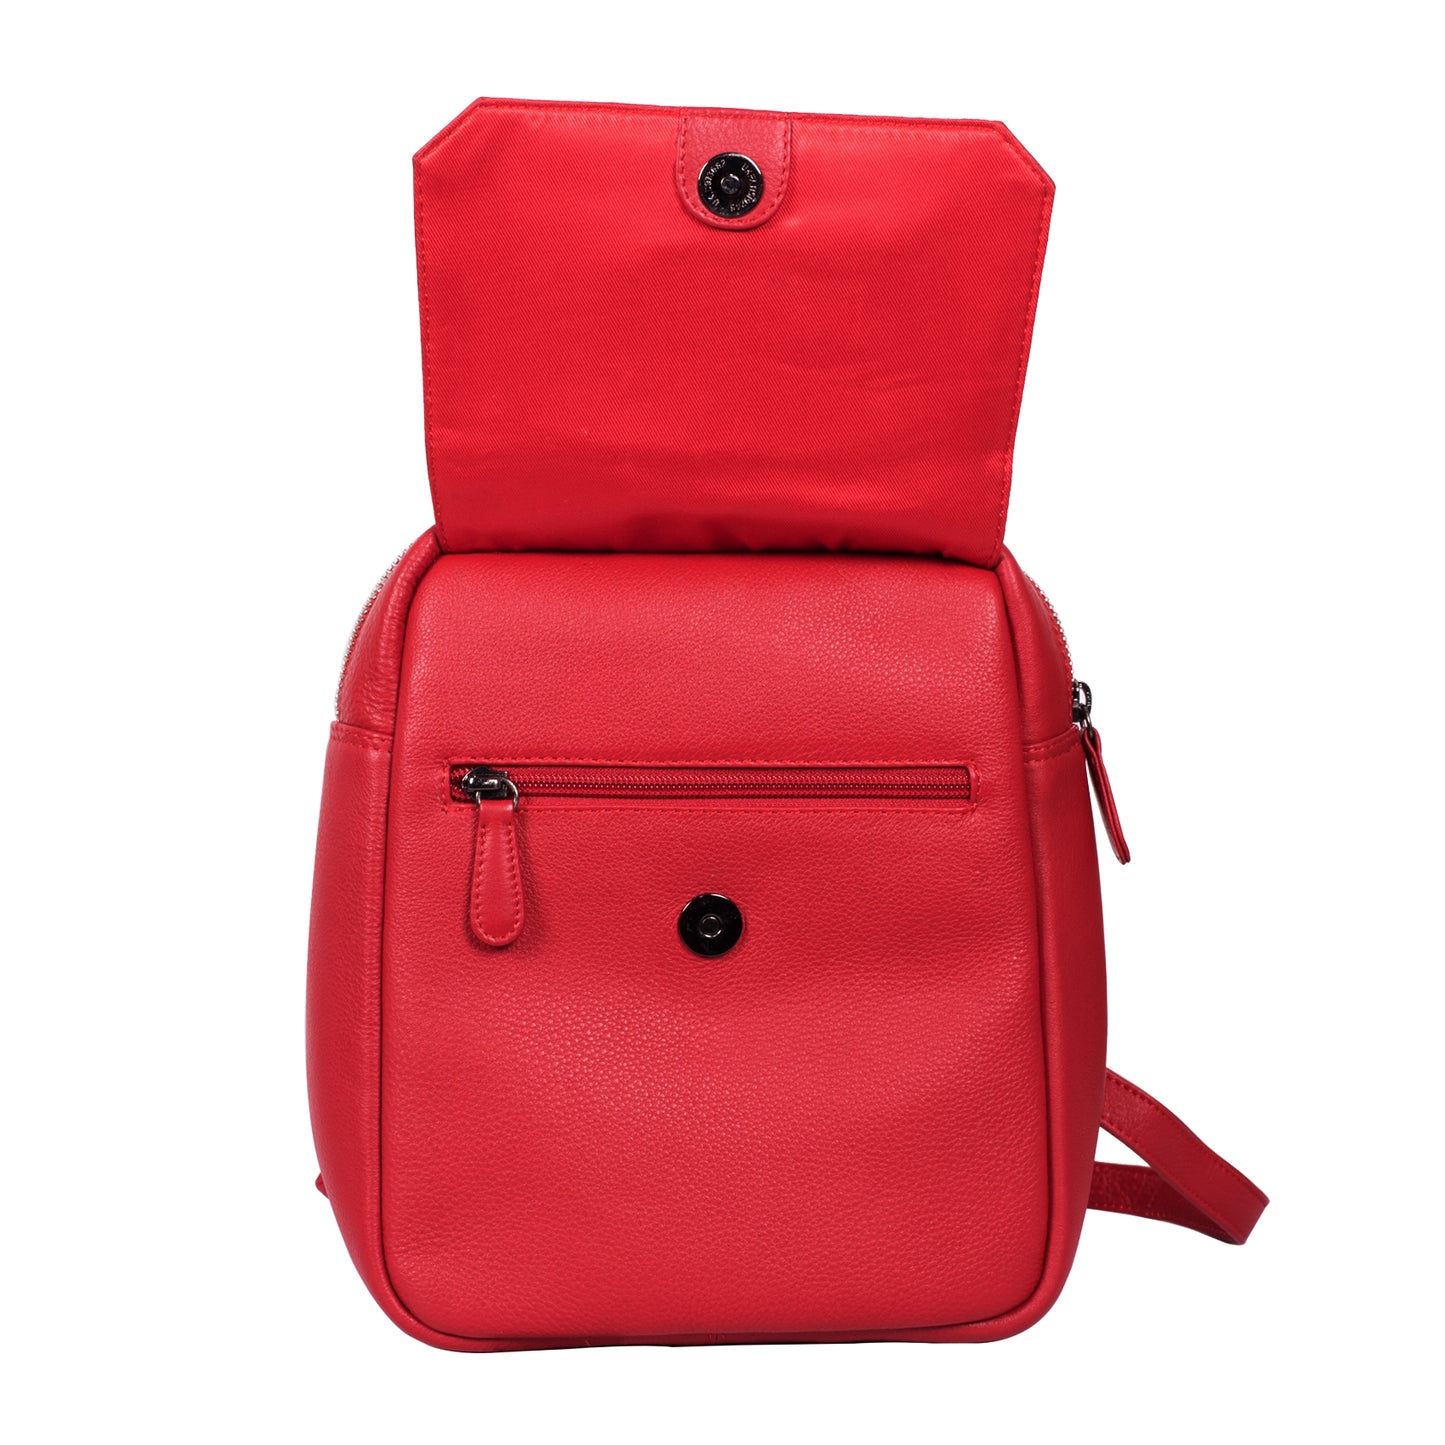 Calfnero Genuine Leather Women's Backpack (71084-RED)